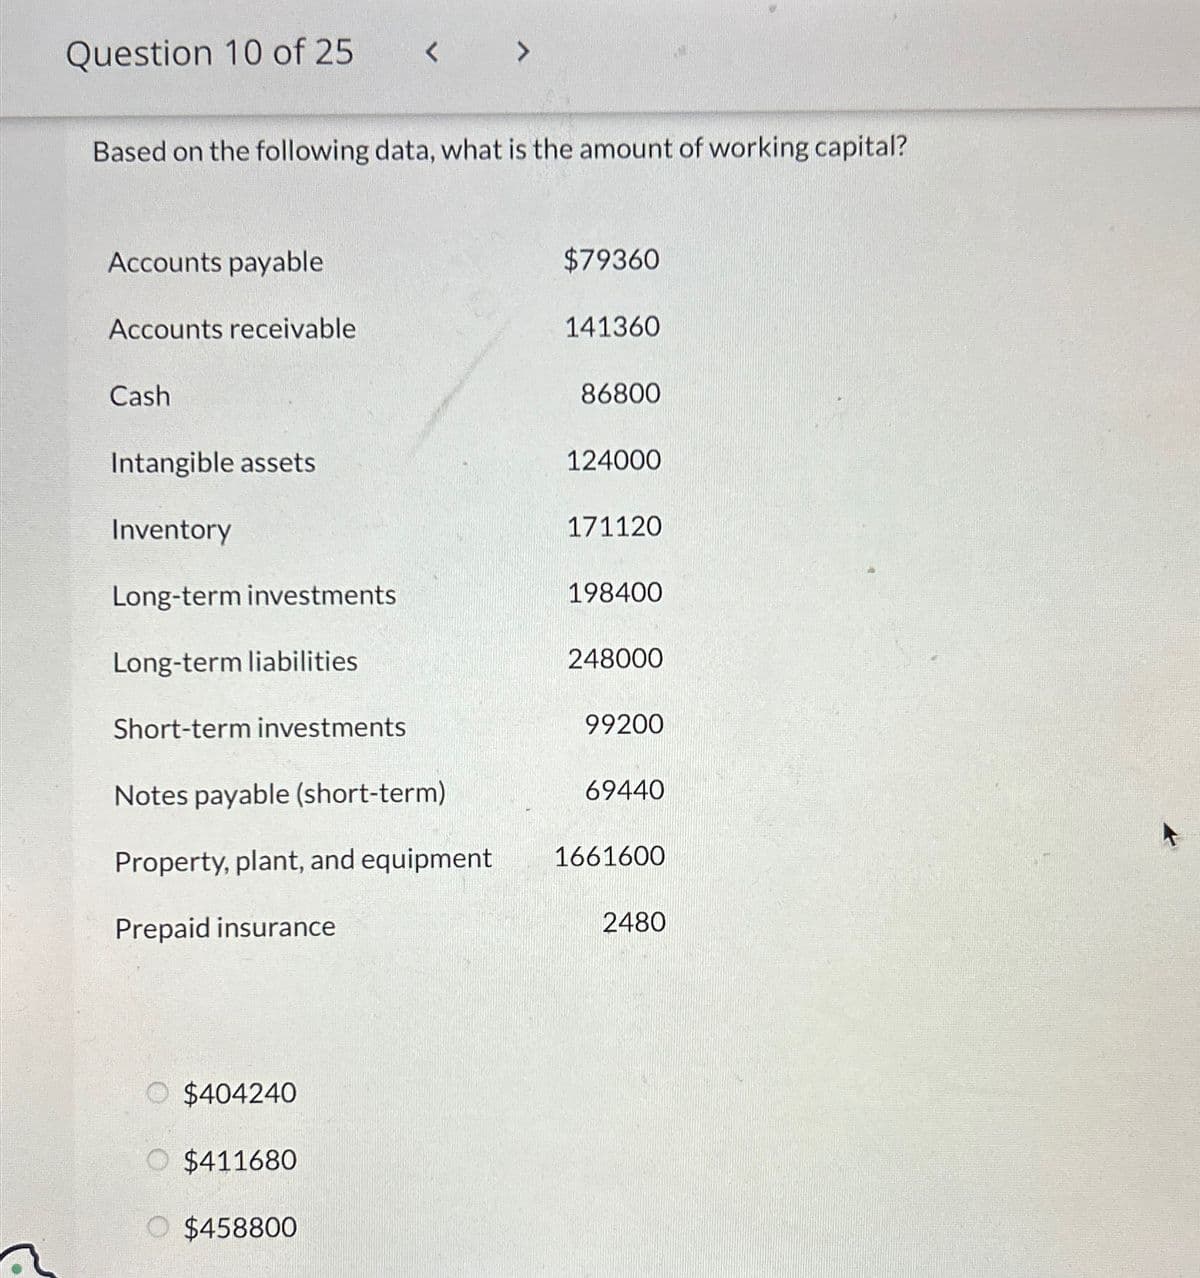 Question 10 of 25
Based on the following data, what is the amount of working capital?
Accounts payable
Accounts receivable
Cash
Intangible assets
Inventory
Long-term investments
Long-term liabilities
Short-term investments
Notes payable (short-term)
Property, plant, and equipment
Prepaid insurance
$404240
O $411680
>
O $458800
$79360
141360
86800
124000
171120
198400
248000
99200
69440
1661600
2480